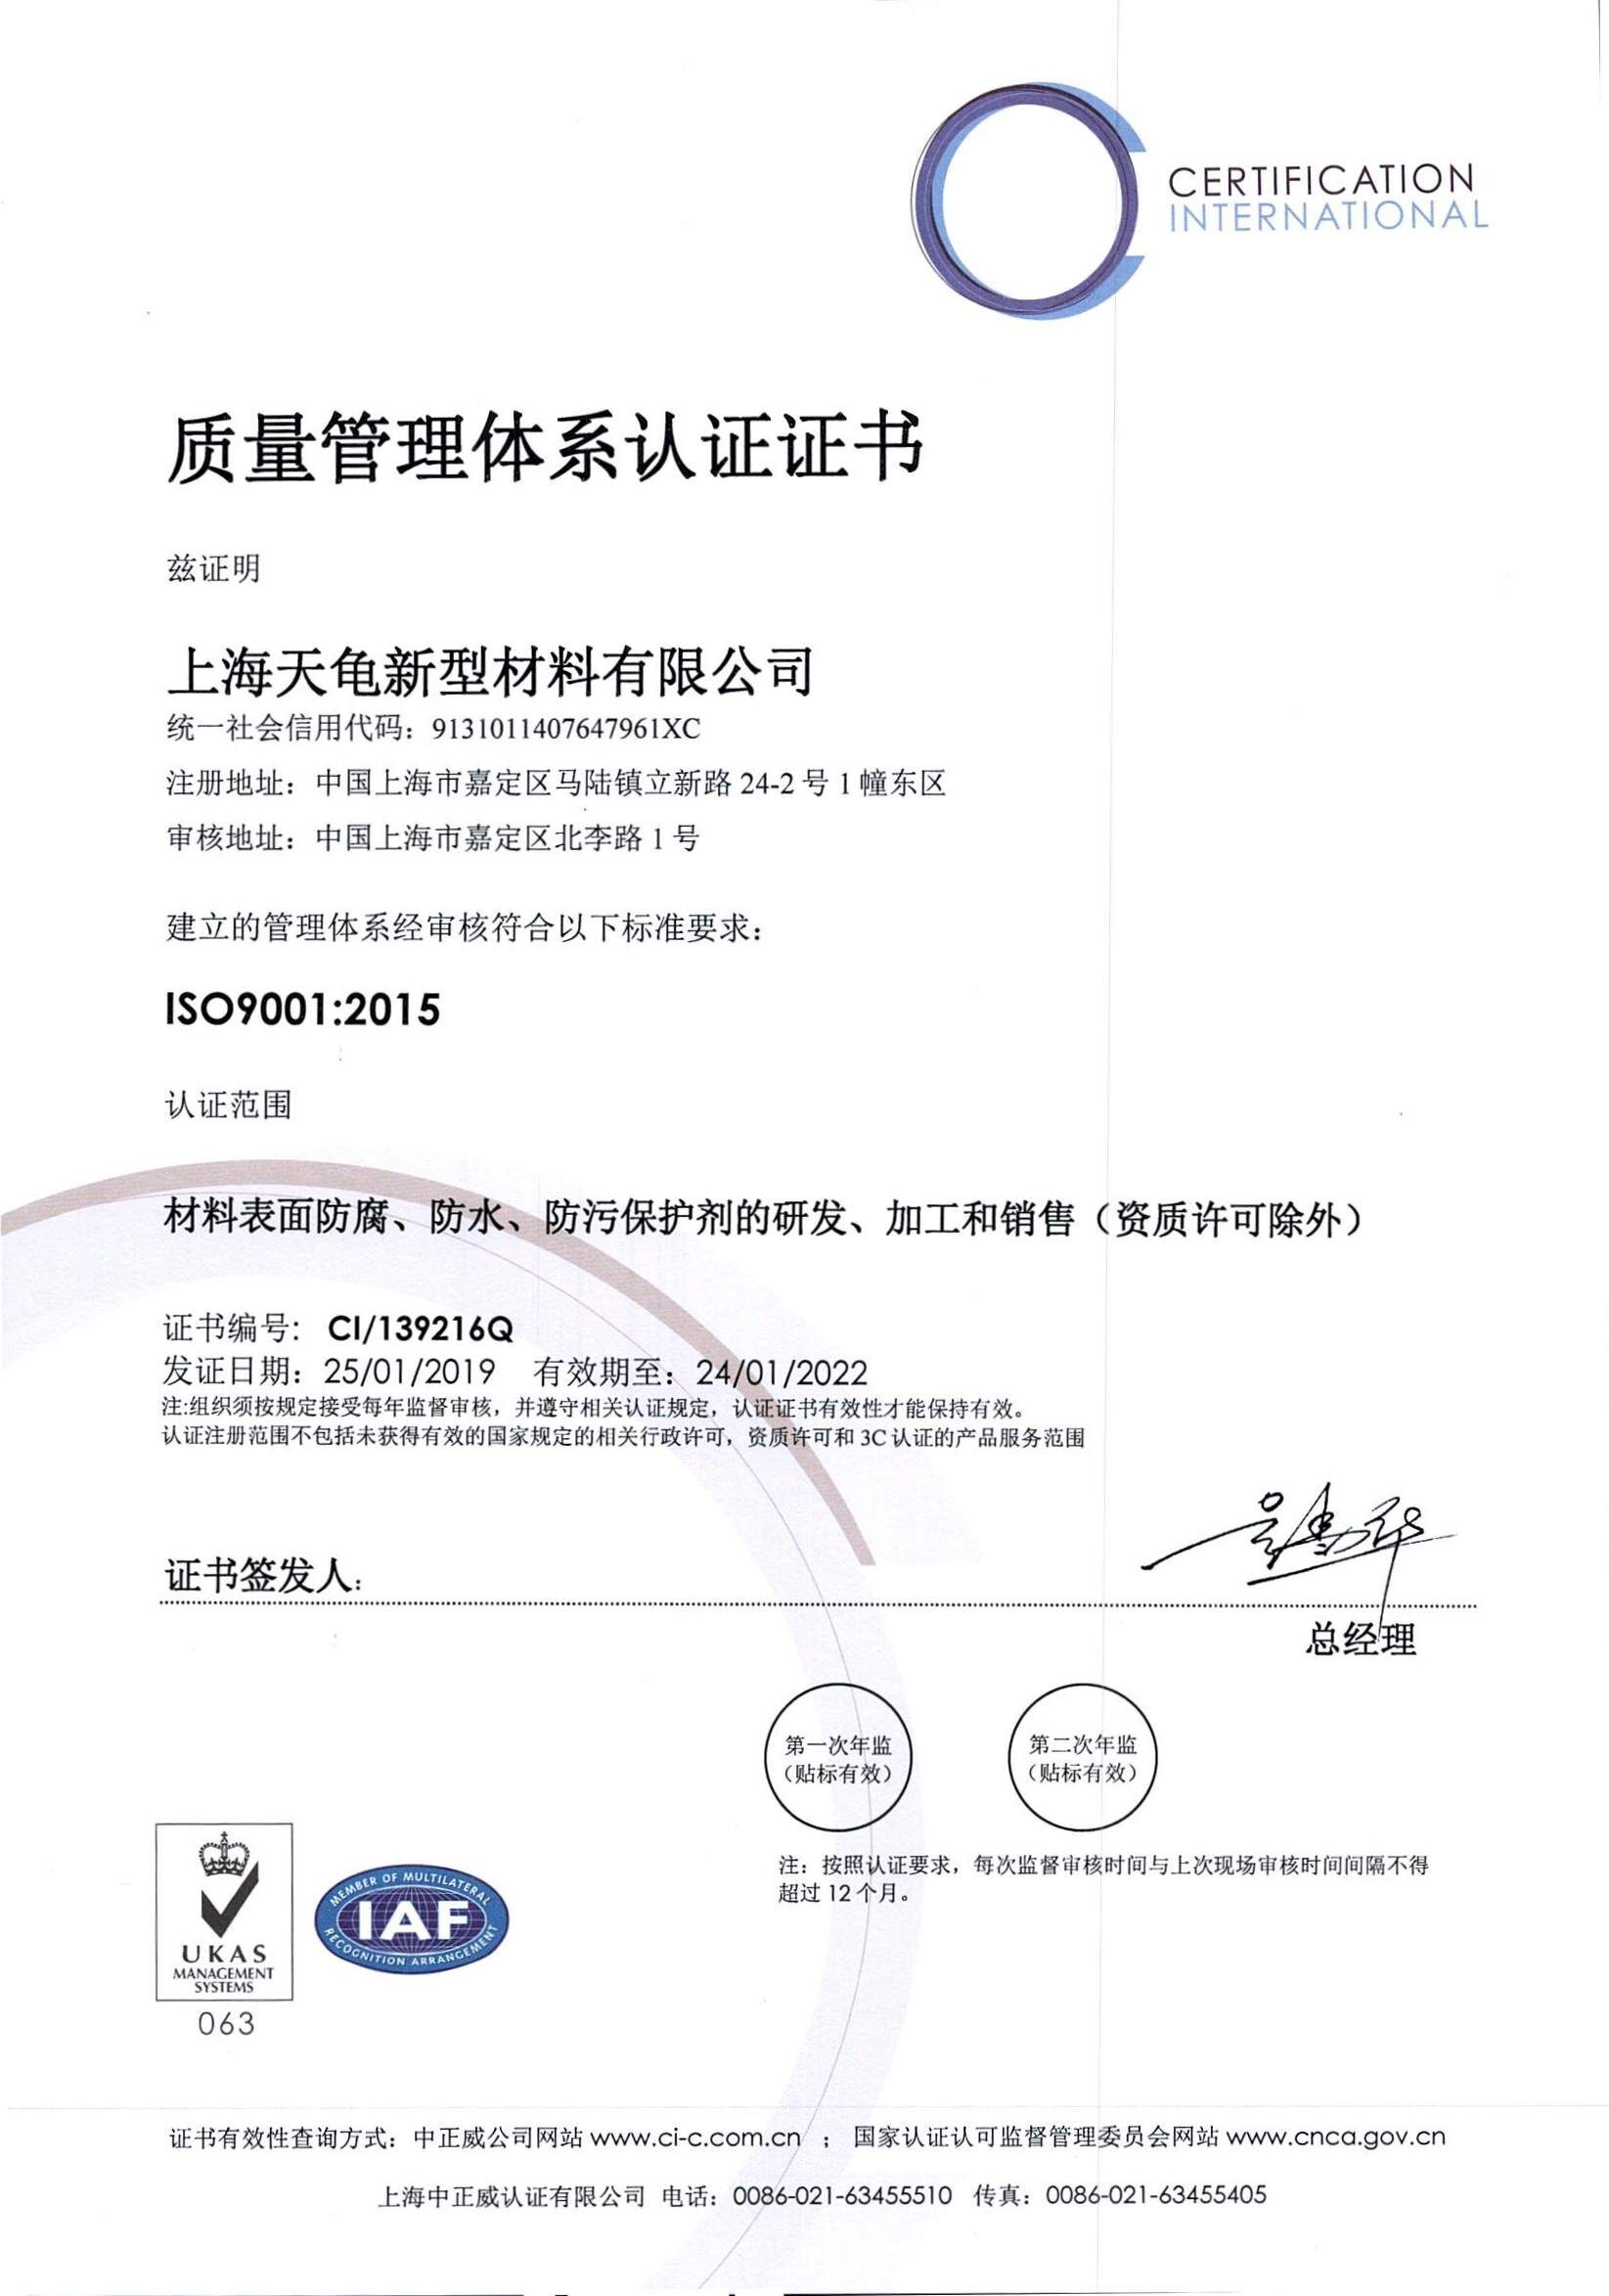 ISO90012015/